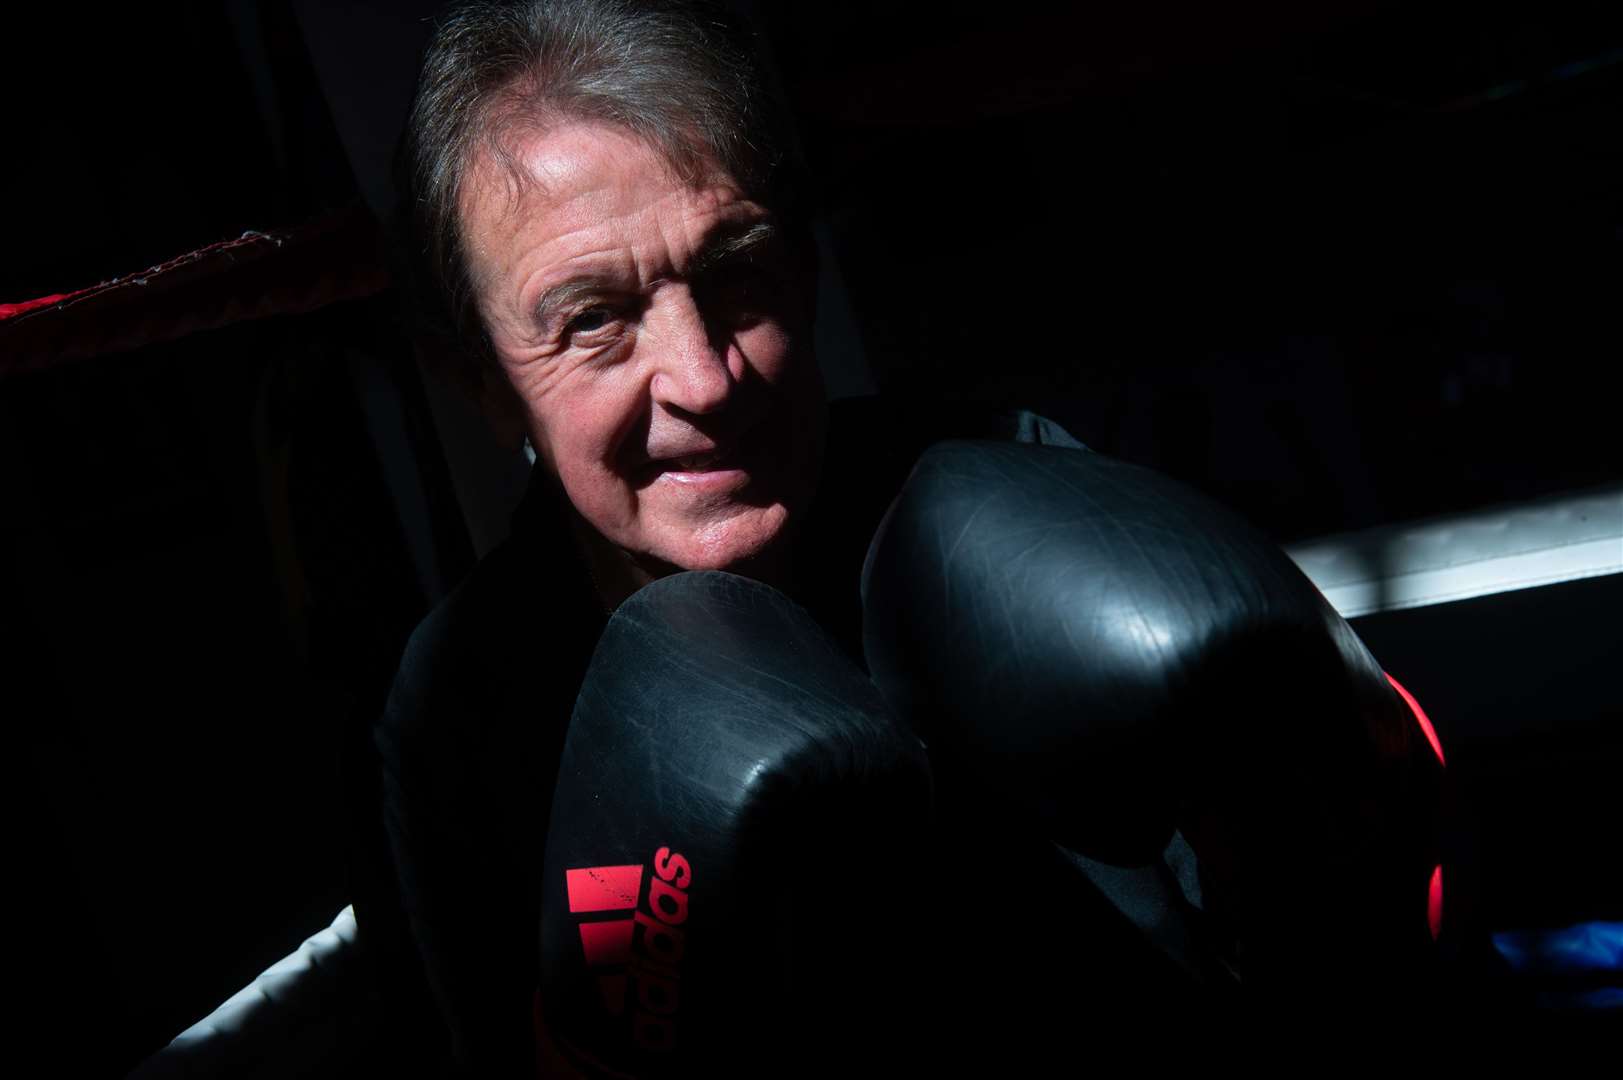 Redfern has been involved in boxing for 62 years.